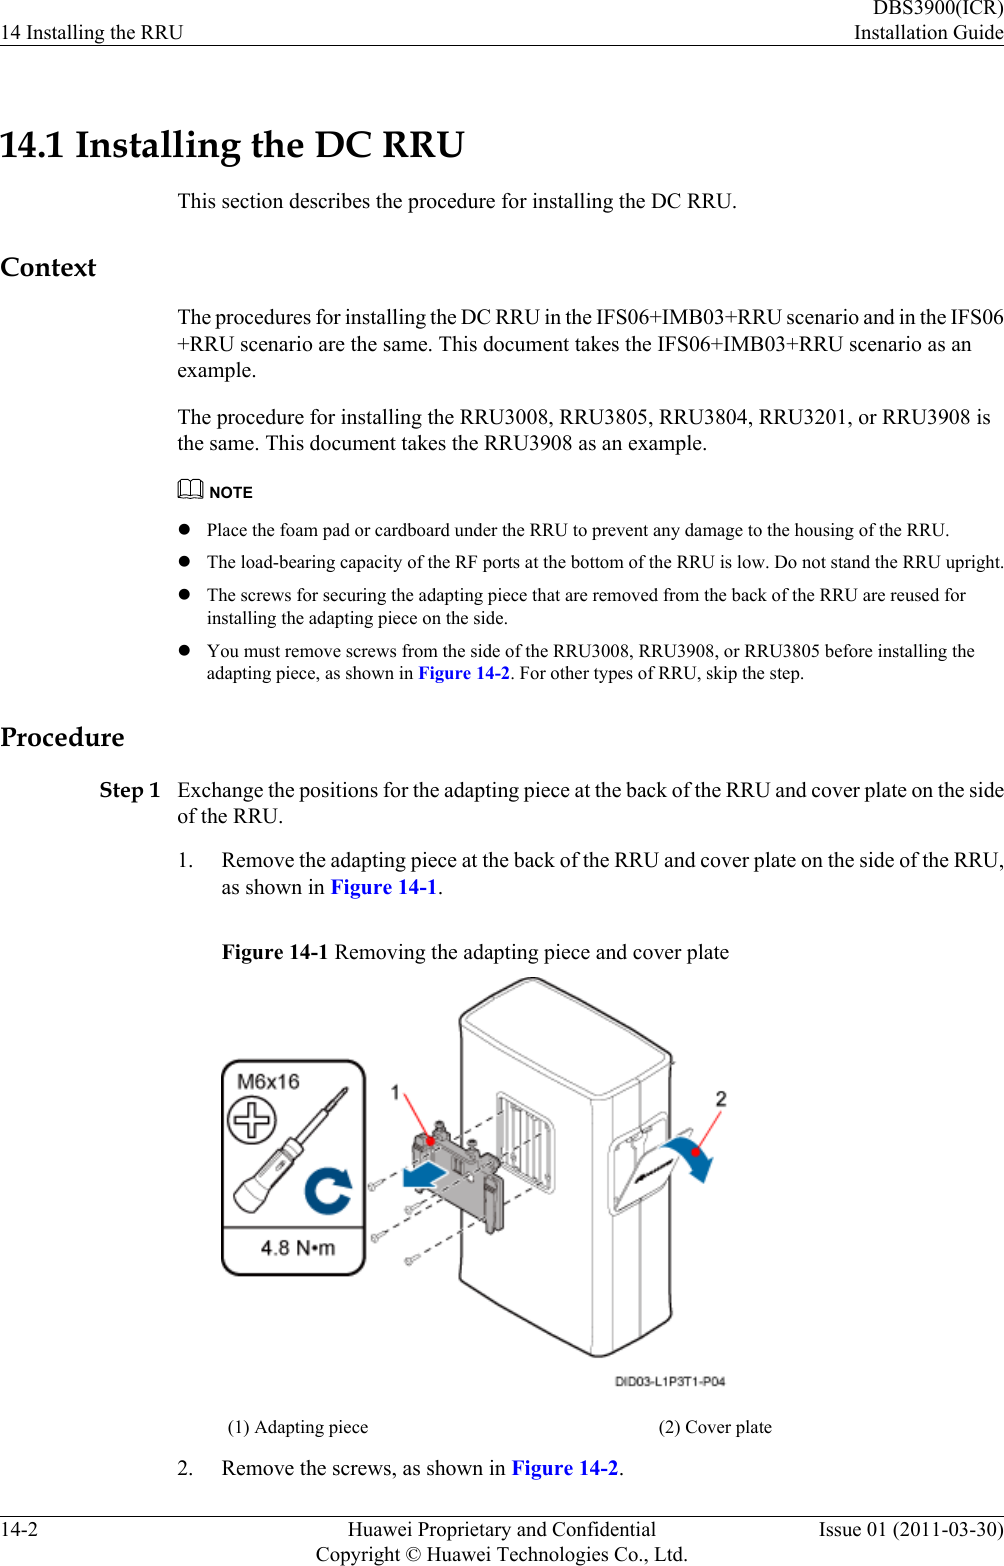 14.1 Installing the DC RRUThis section describes the procedure for installing the DC RRU.ContextThe procedures for installing the DC RRU in the IFS06+IMB03+RRU scenario and in the IFS06+RRU scenario are the same. This document takes the IFS06+IMB03+RRU scenario as anexample.The procedure for installing the RRU3008, RRU3805, RRU3804, RRU3201, or RRU3908 isthe same. This document takes the RRU3908 as an example.NOTElPlace the foam pad or cardboard under the RRU to prevent any damage to the housing of the RRU.lThe load-bearing capacity of the RF ports at the bottom of the RRU is low. Do not stand the RRU upright.lThe screws for securing the adapting piece that are removed from the back of the RRU are reused forinstalling the adapting piece on the side.lYou must remove screws from the side of the RRU3008, RRU3908, or RRU3805 before installing theadapting piece, as shown in Figure 14-2. For other types of RRU, skip the step.ProcedureStep 1 Exchange the positions for the adapting piece at the back of the RRU and cover plate on the sideof the RRU.1. Remove the adapting piece at the back of the RRU and cover plate on the side of the RRU,as shown in Figure 14-1.Figure 14-1 Removing the adapting piece and cover plate(1) Adapting piece (2) Cover plate2. Remove the screws, as shown in Figure 14-2.14 Installing the RRUDBS3900(ICR)Installation Guide14-2 Huawei Proprietary and ConfidentialCopyright © Huawei Technologies Co., Ltd.Issue 01 (2011-03-30)